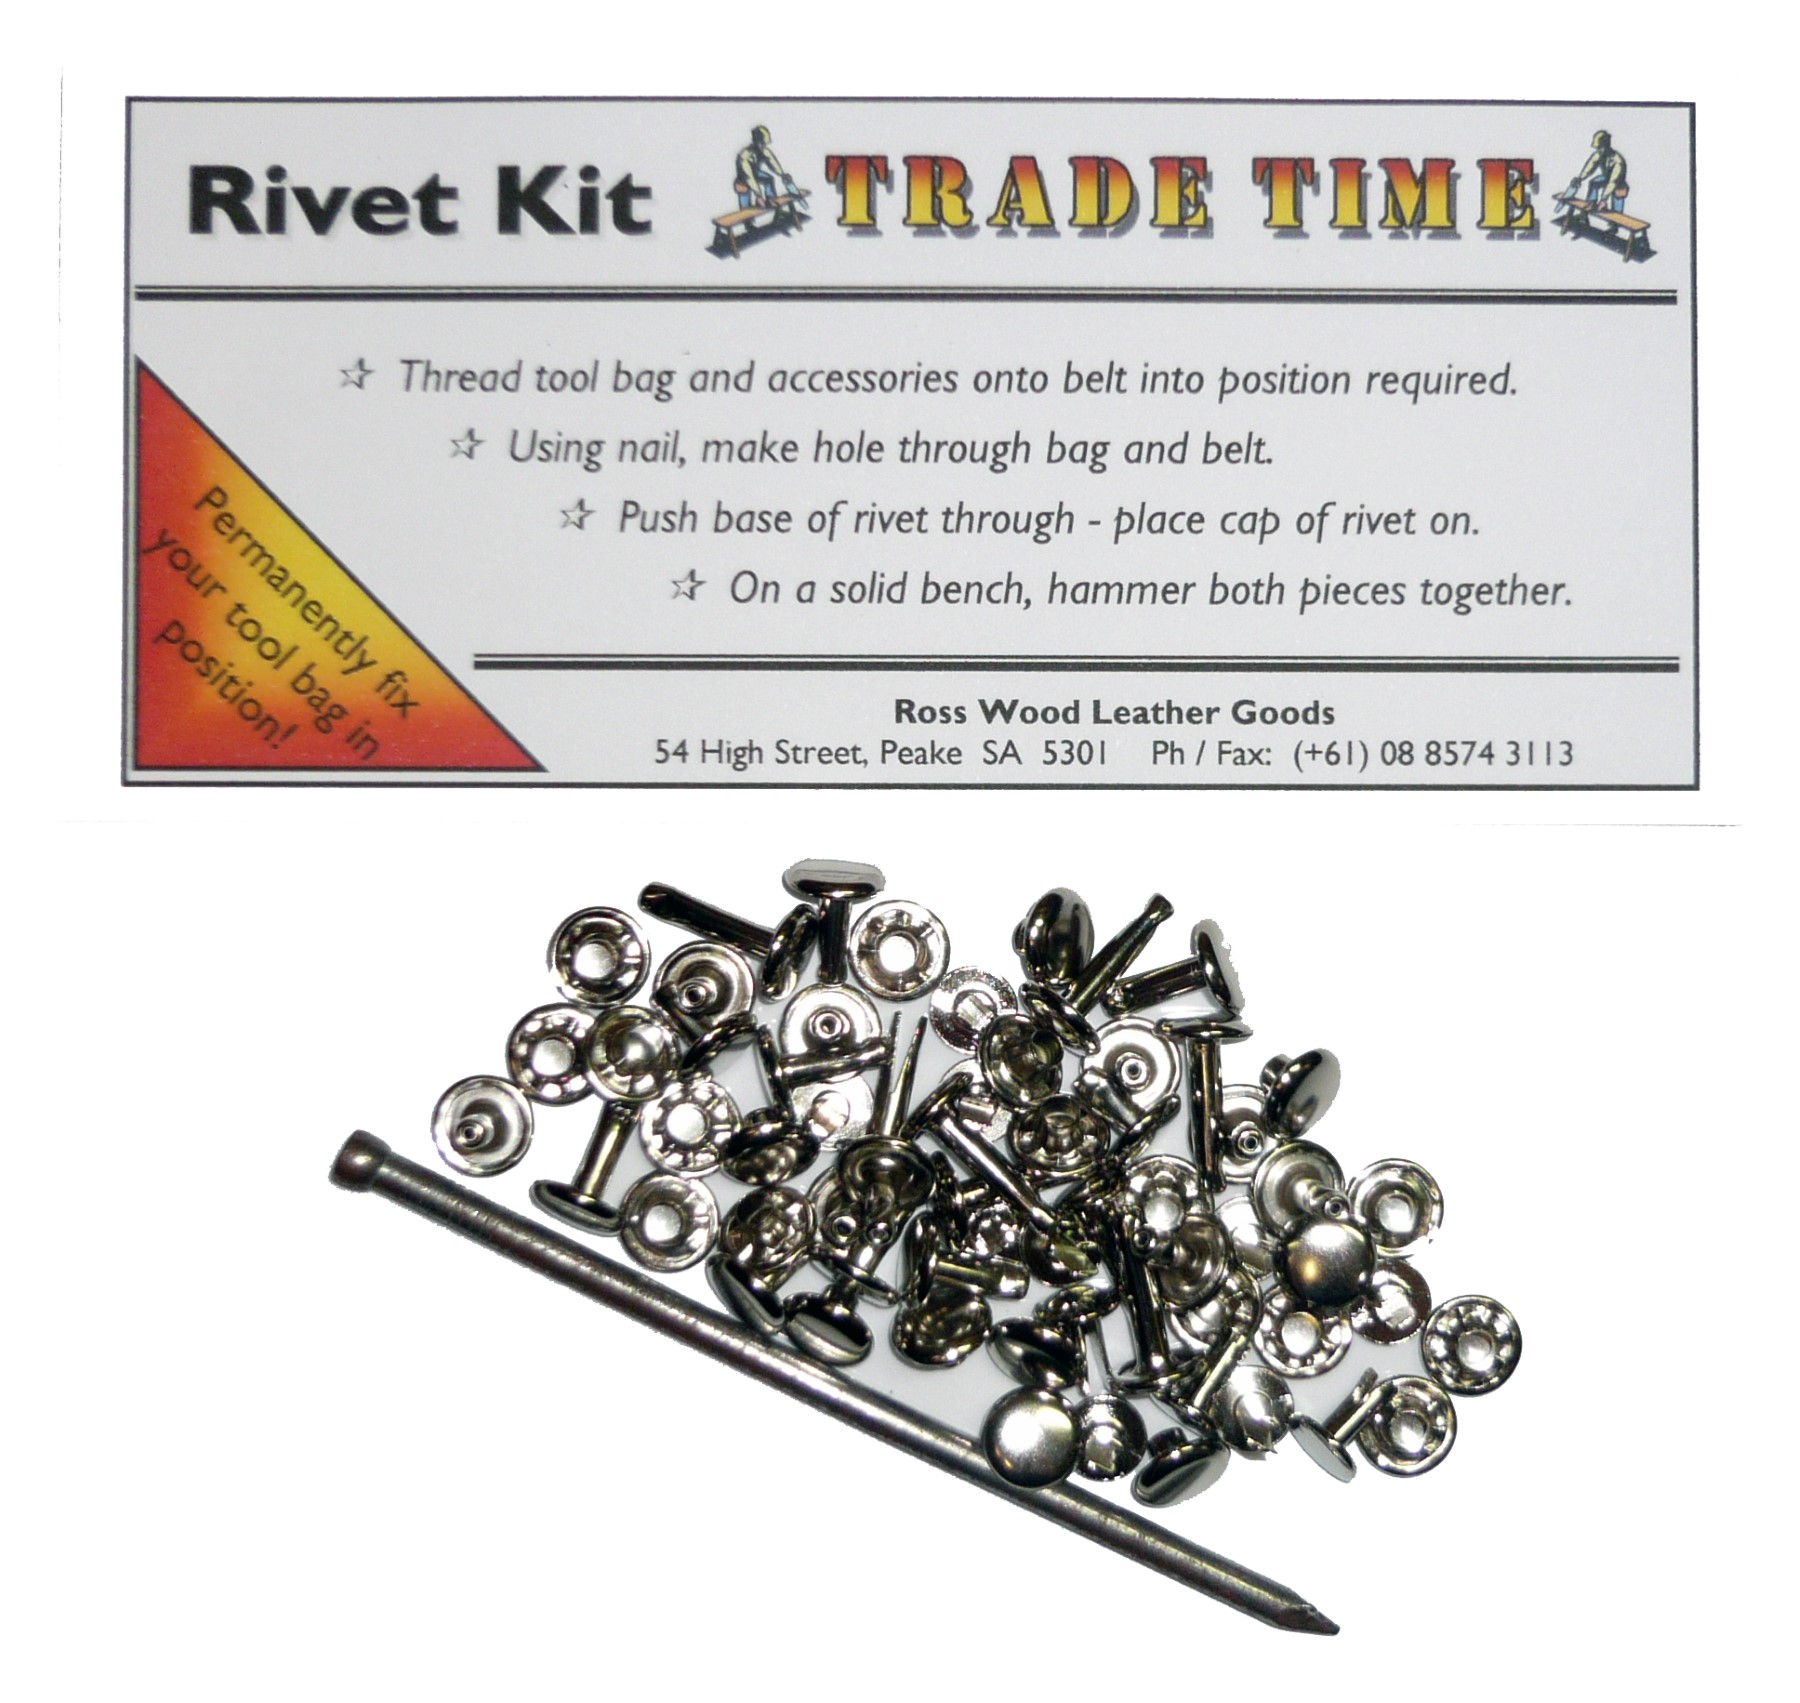 Rivet Kit - Trade Time Tool Bags - Quality Leather Goods